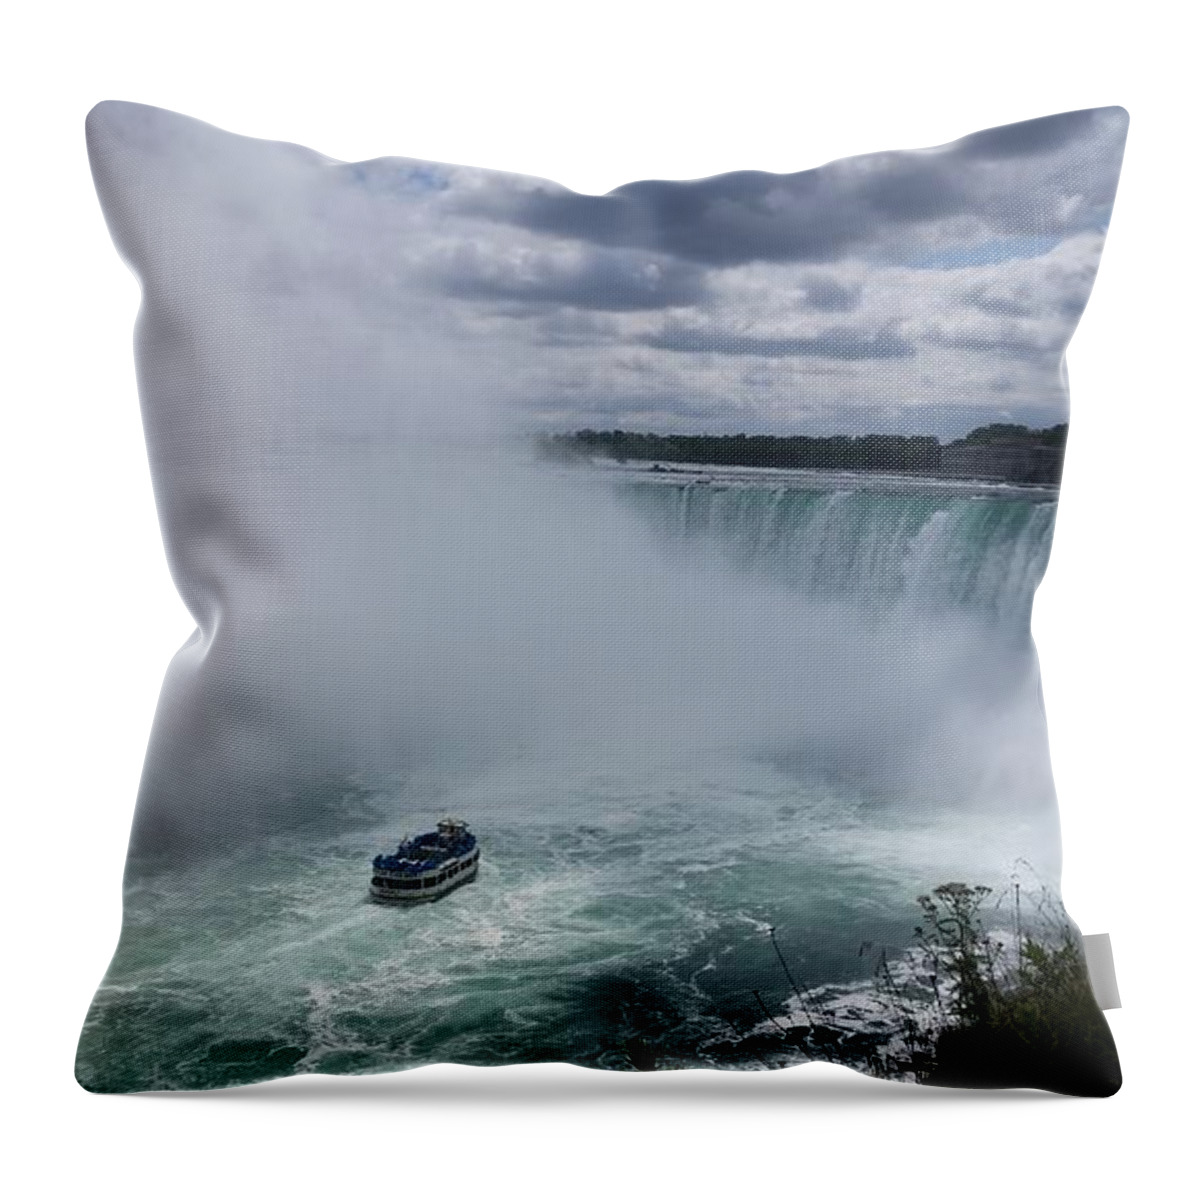  Throw Pillow featuring the photograph Niagara Falls #1 by Alison Wu